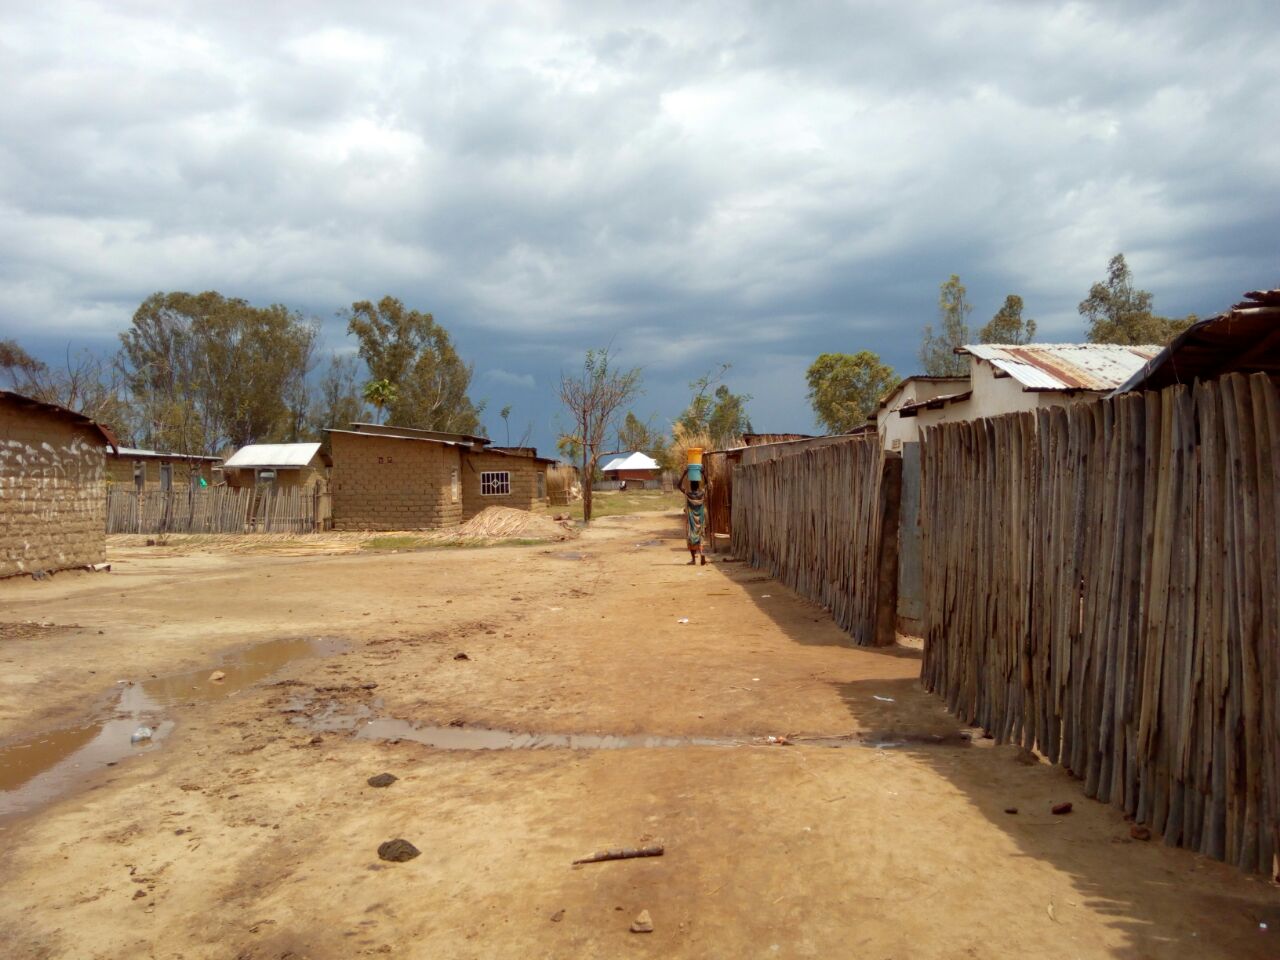 The Street that the wrongdoers used to run away in Gatumba